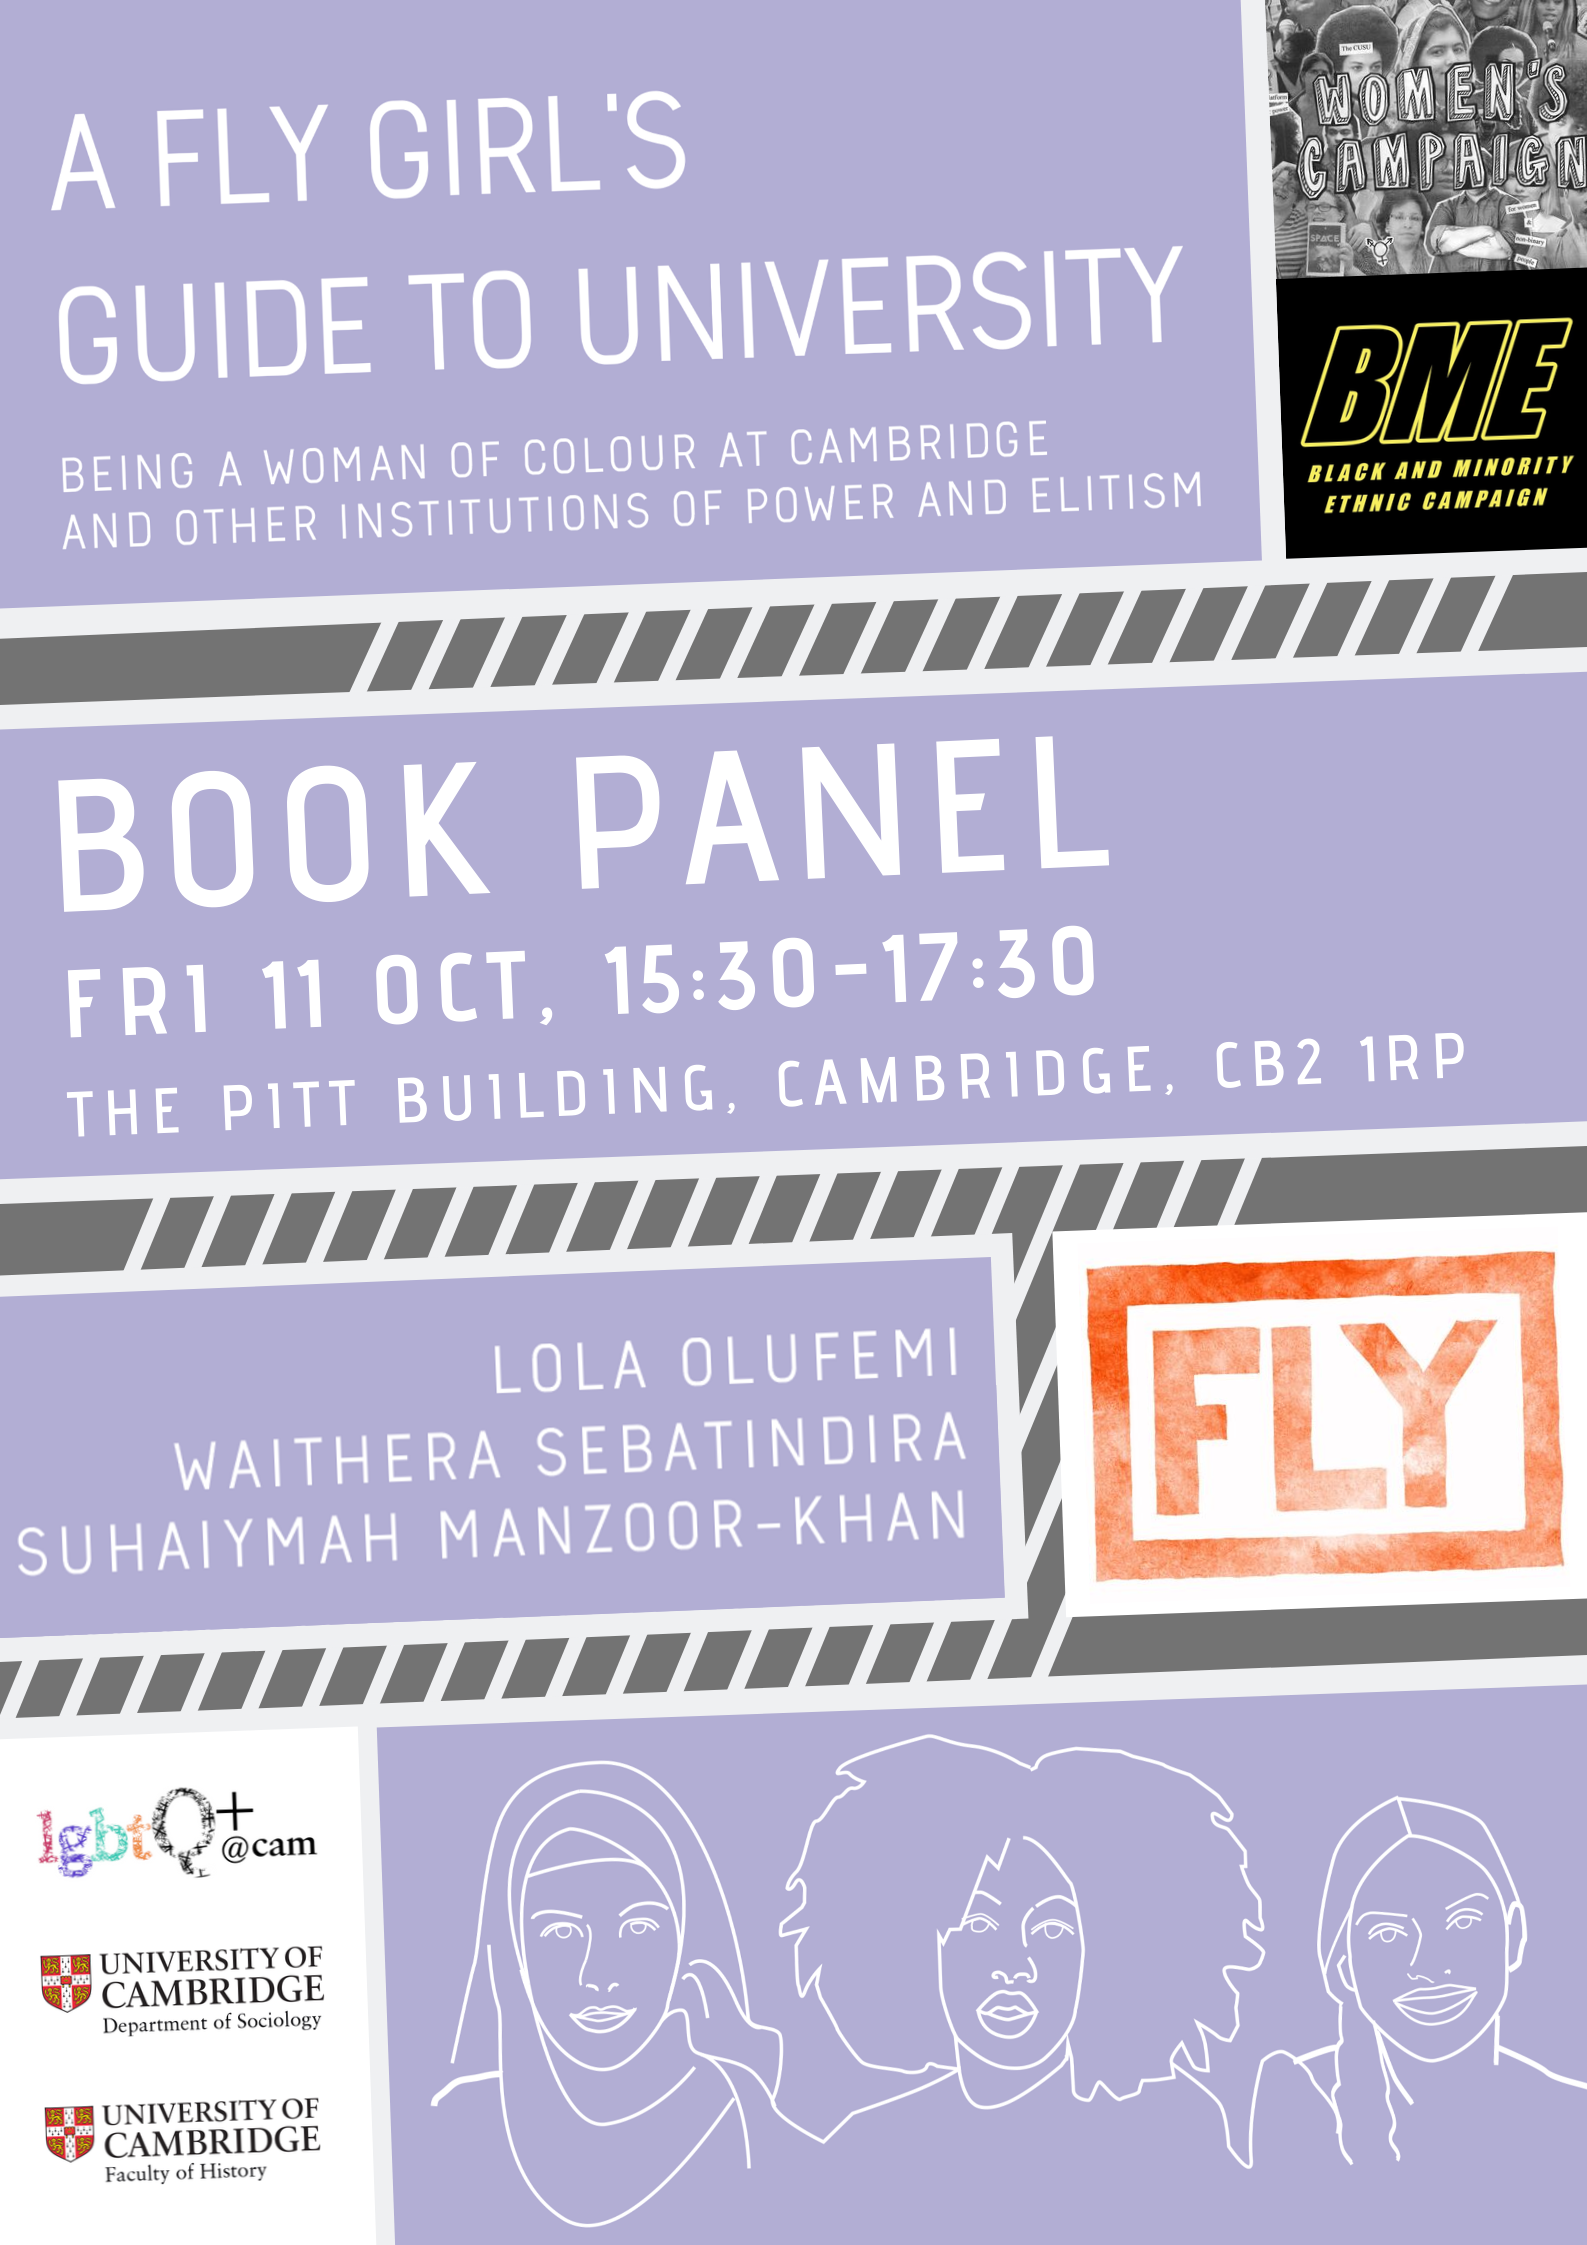 FLY Girls Guide to University